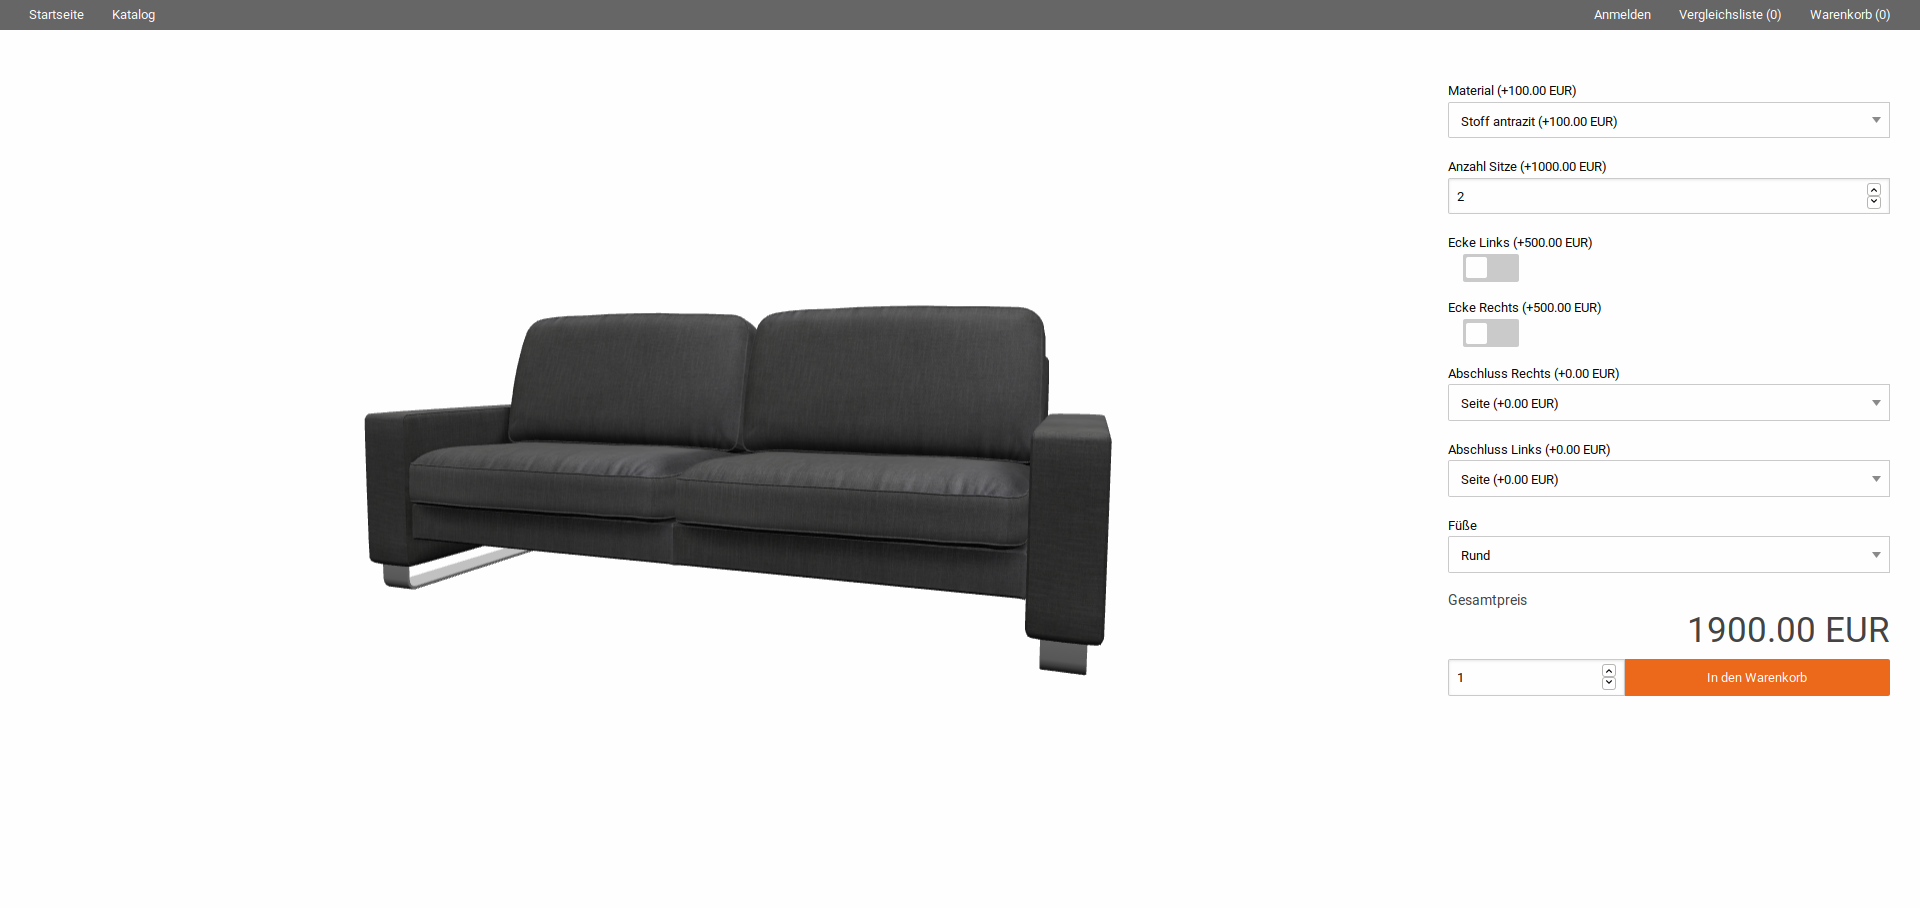 Implementation of the product configuration for the Lipari sofa considering element overview I